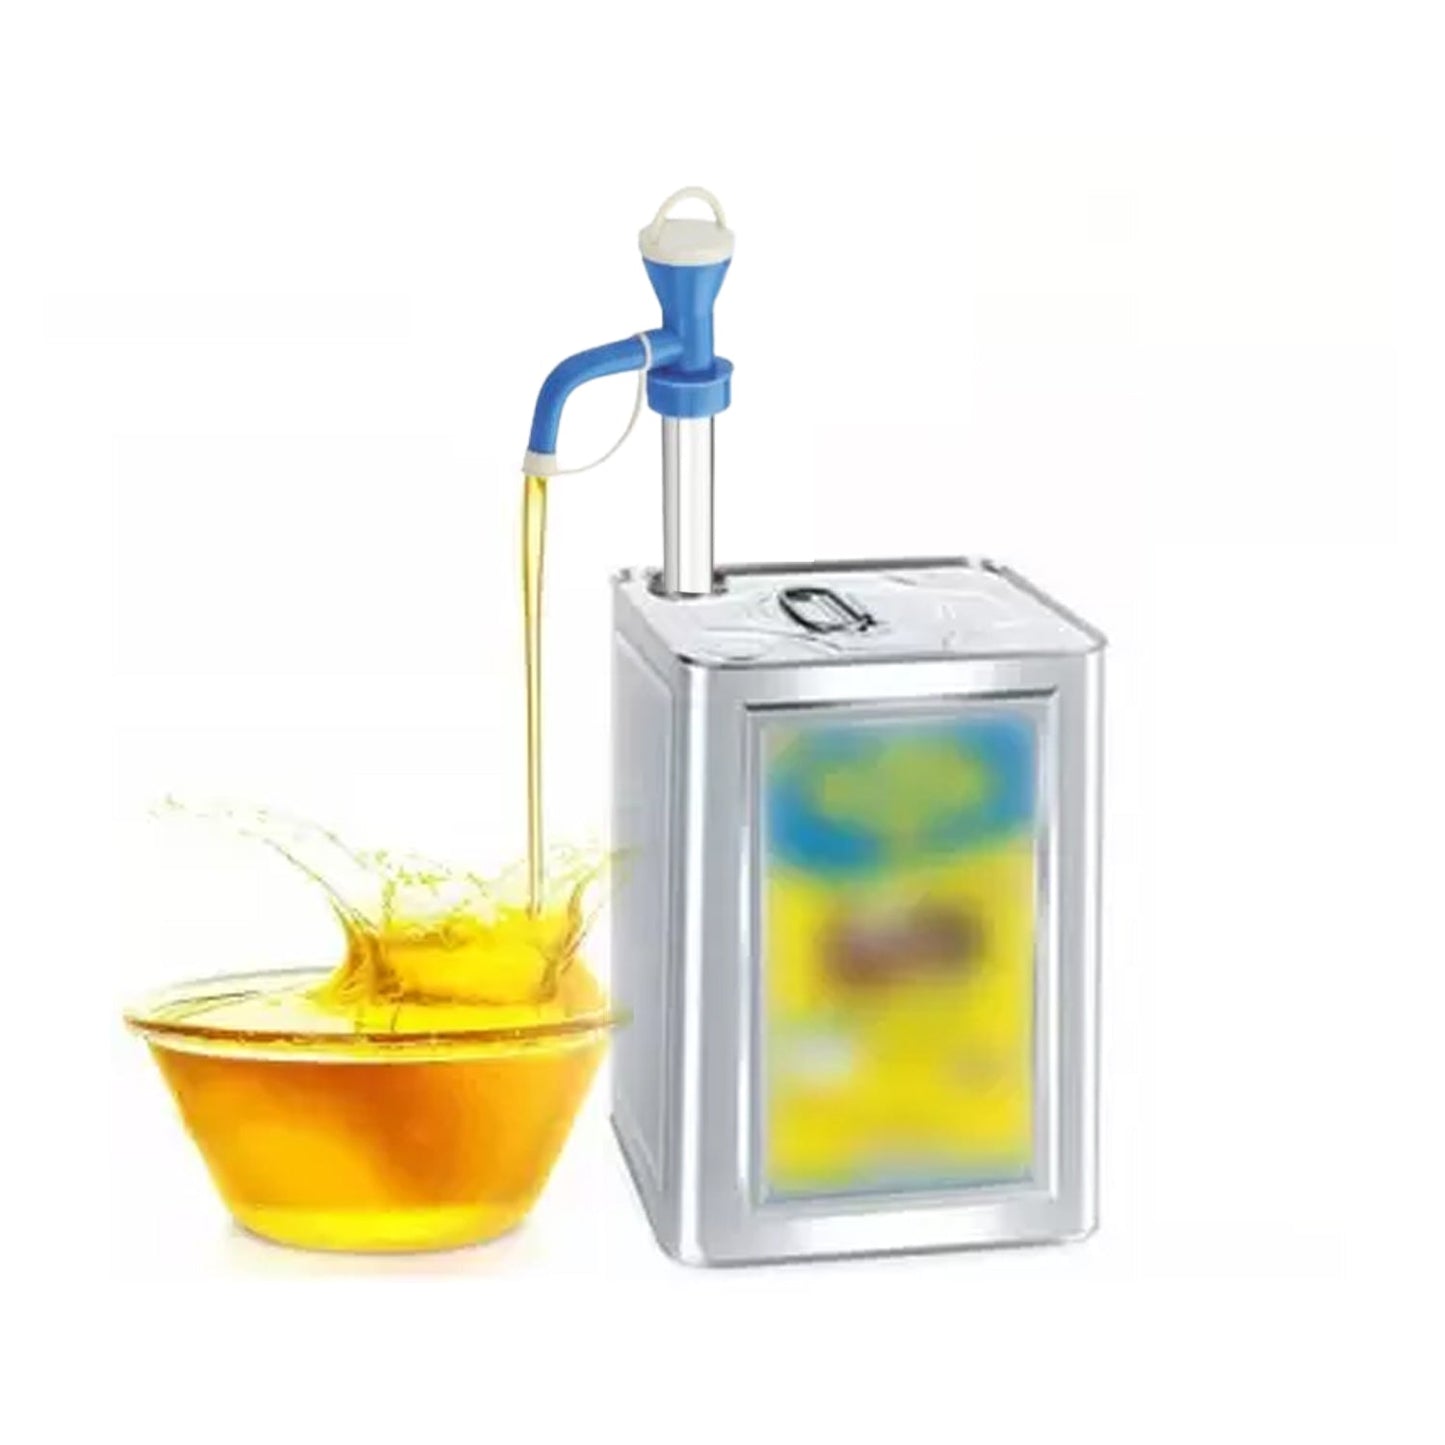 110 Stainless Steel Kitchen Manual Hand Oil Pump Dukandaily